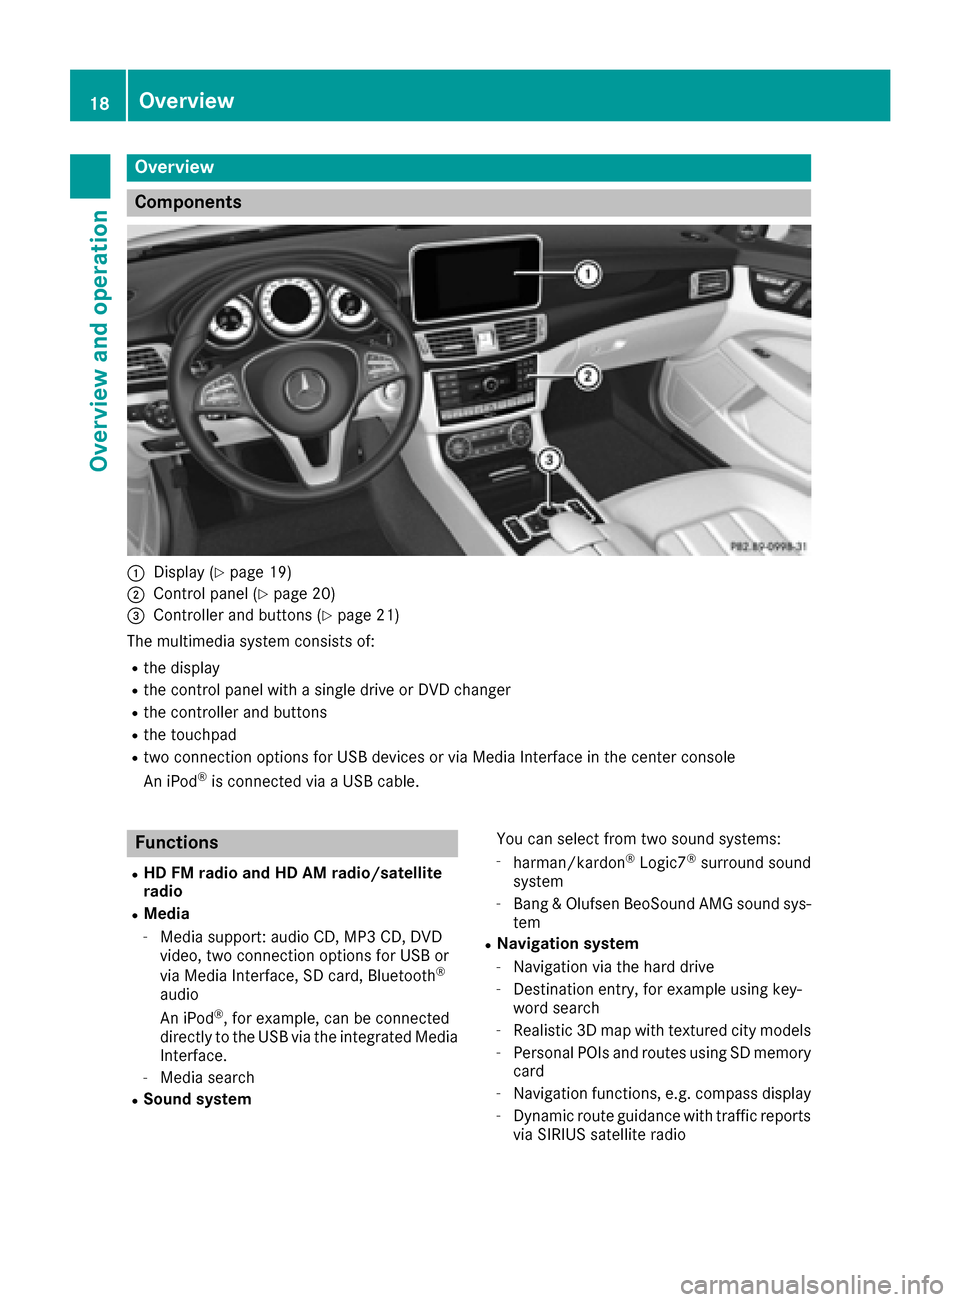 MERCEDES-BENZ CLA-Class 2017 C117 Comand Manual Overview
Components
:Display (Ypage 19)
;Control panel (Ypage 20)
=Controller and buttons (Ypage 21)
The multimedia system consists of:
Rthe display
Rthe control panel with a single drive or DVD chang